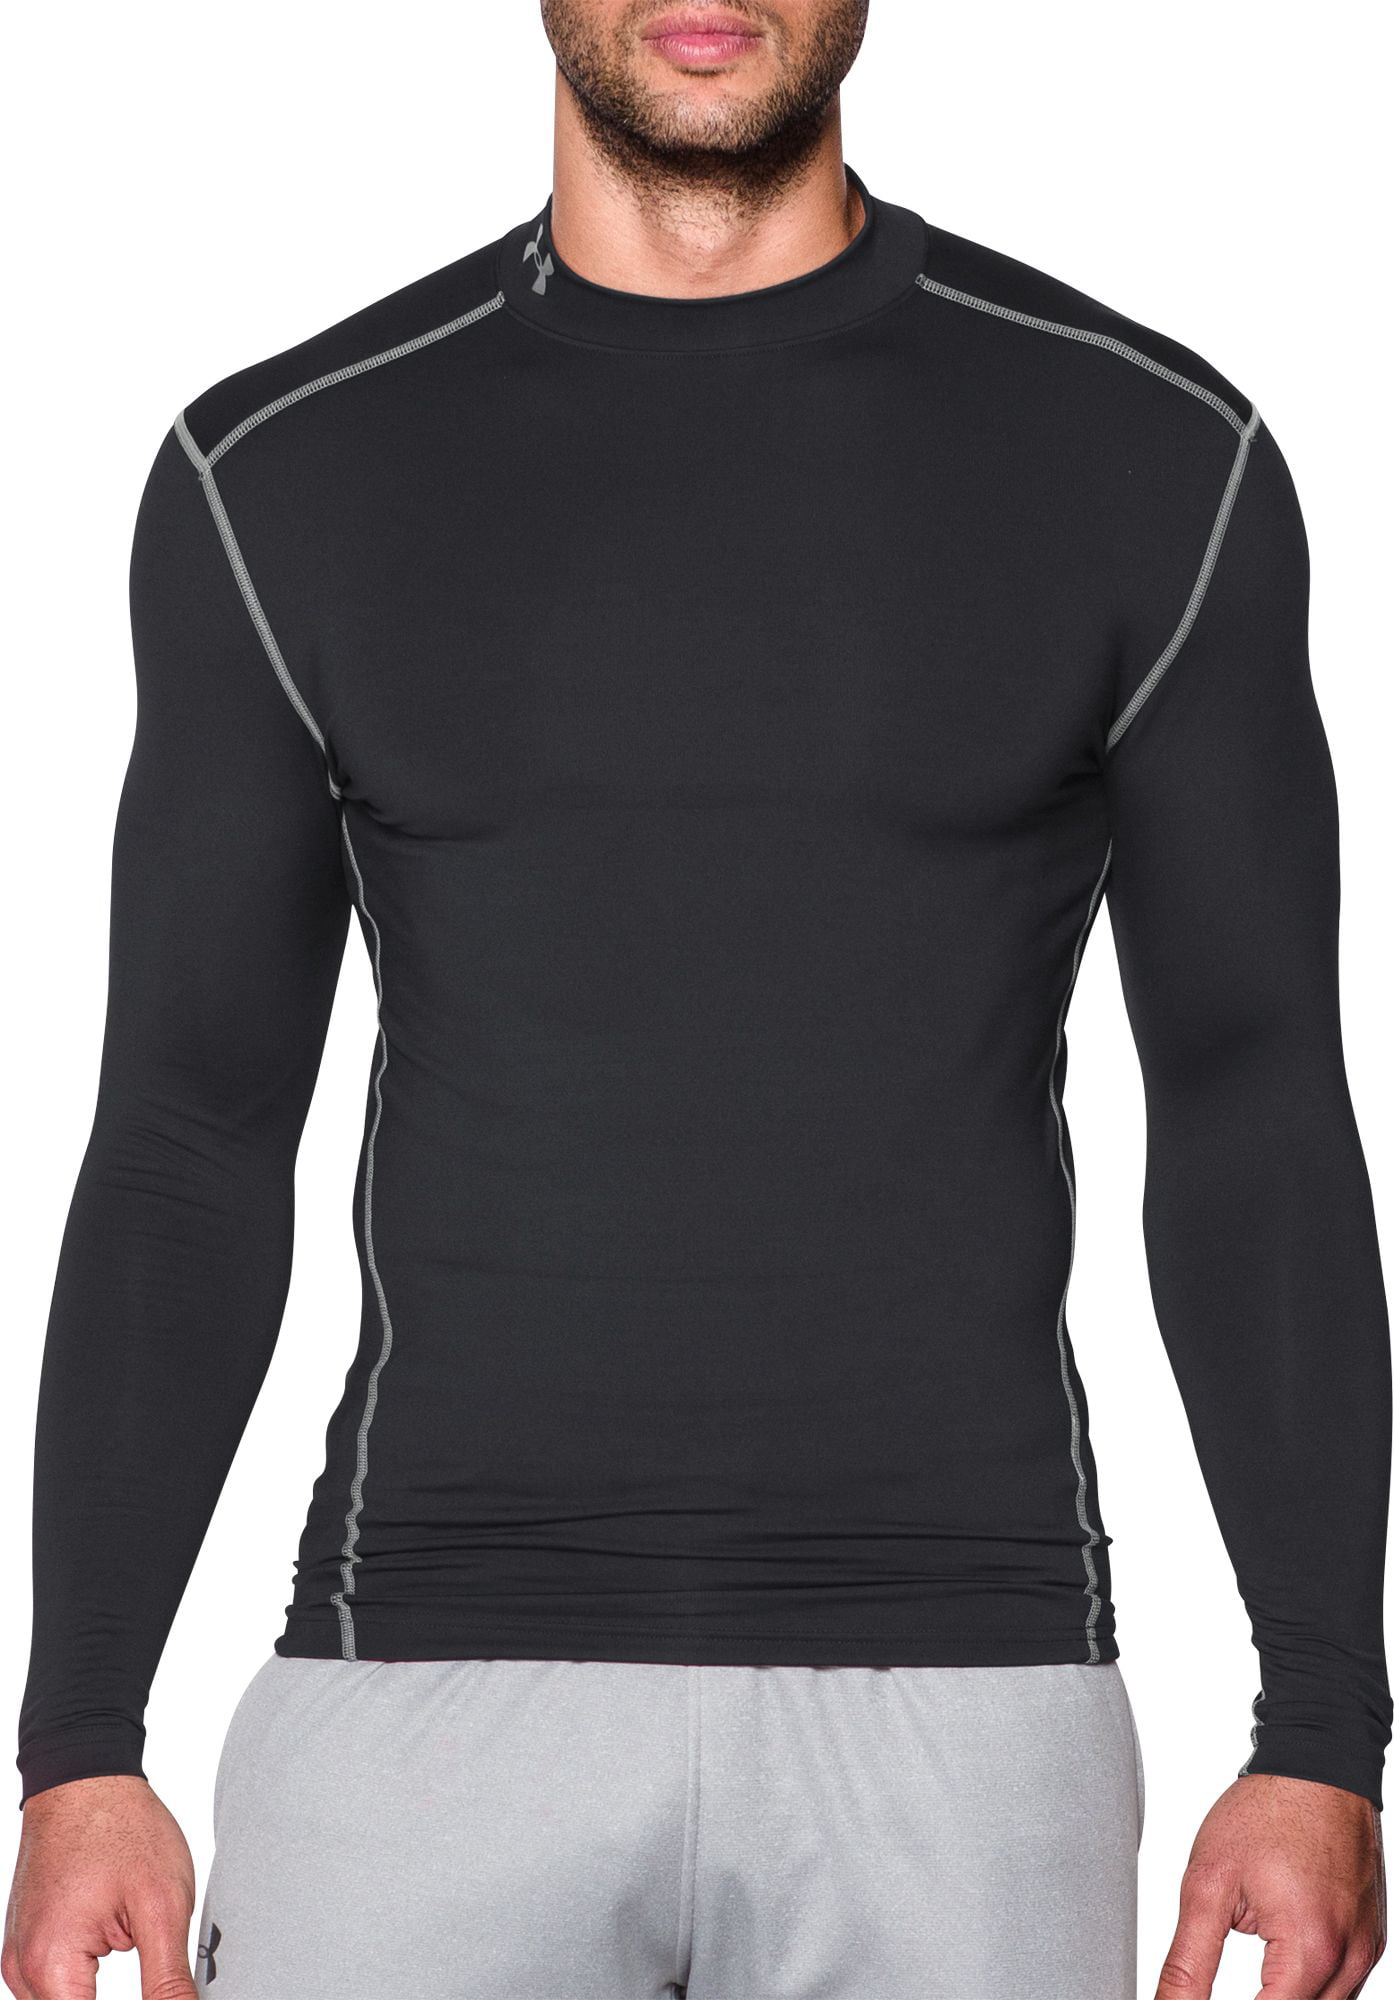 Under Armour Men's ColdGear Armour Compression Mock Long-Sleeve T-Shirt  Black (001)/Steel 3X-Large Tall 